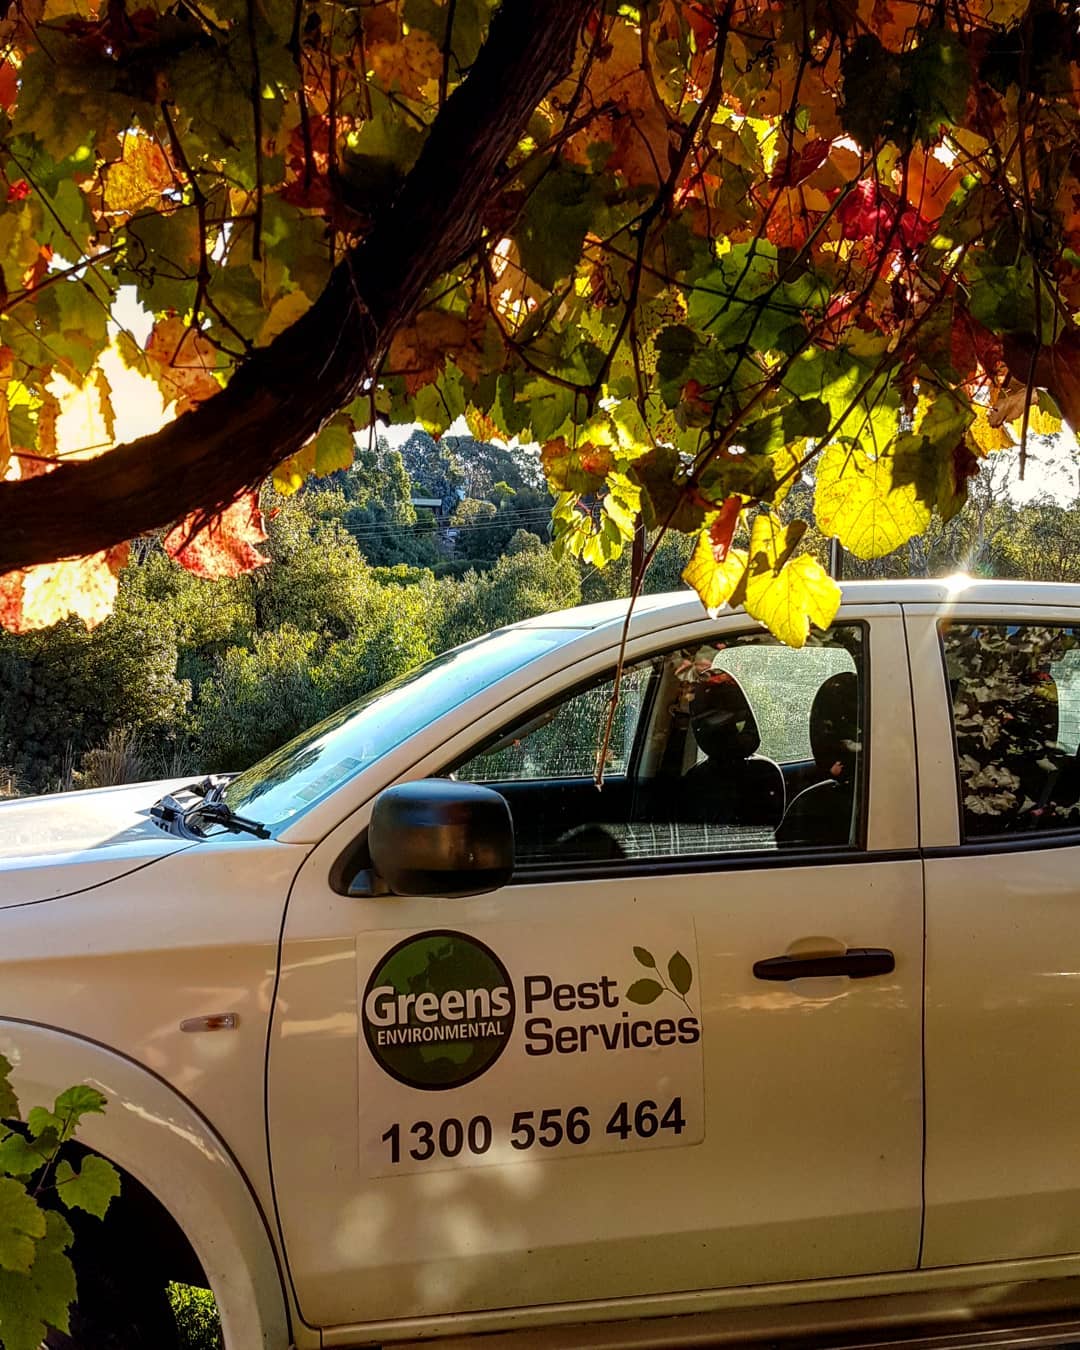 Greens pest control adelaide company vehicle